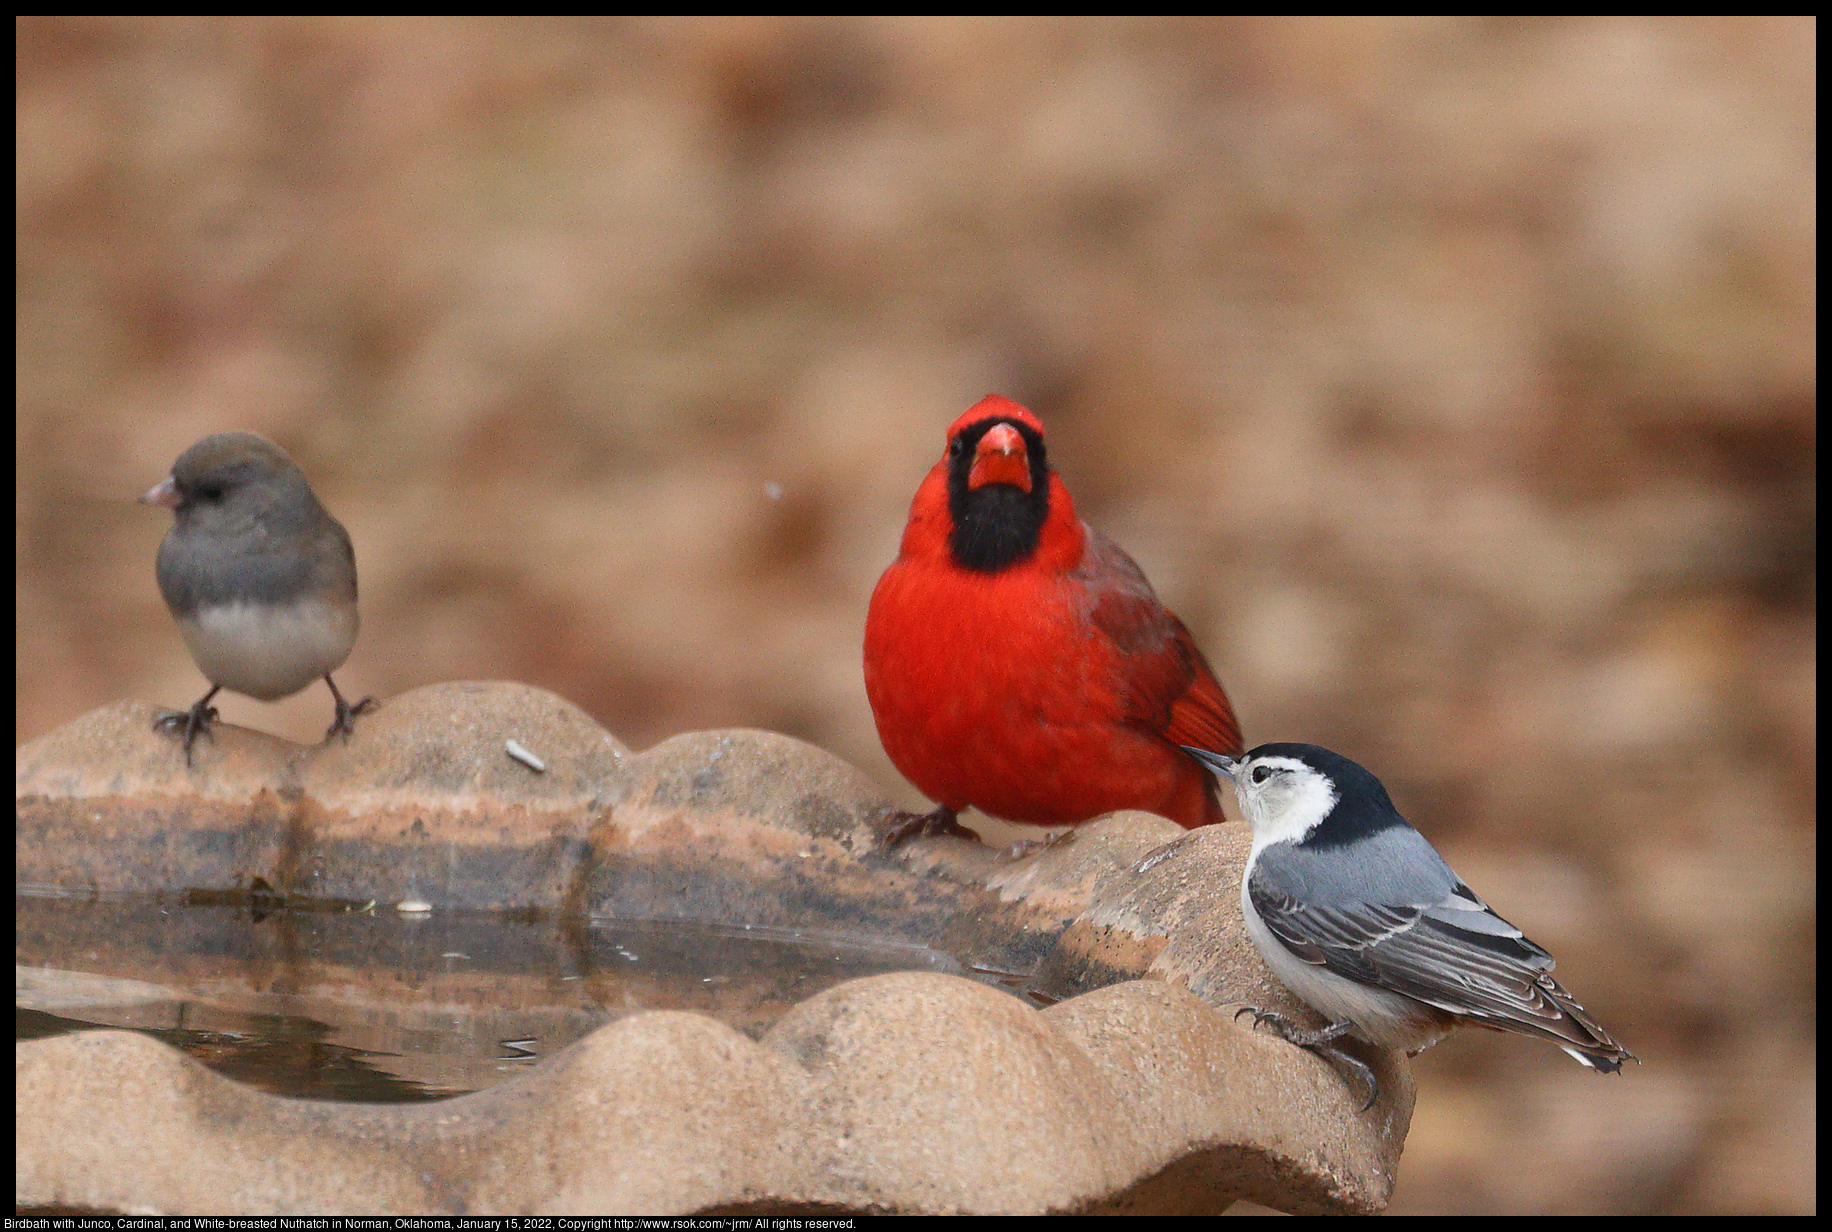 Birdbath with Junco, Cardinal, and White-breasted Nuthatch in Norman, Oklahoma, January 15, 2022